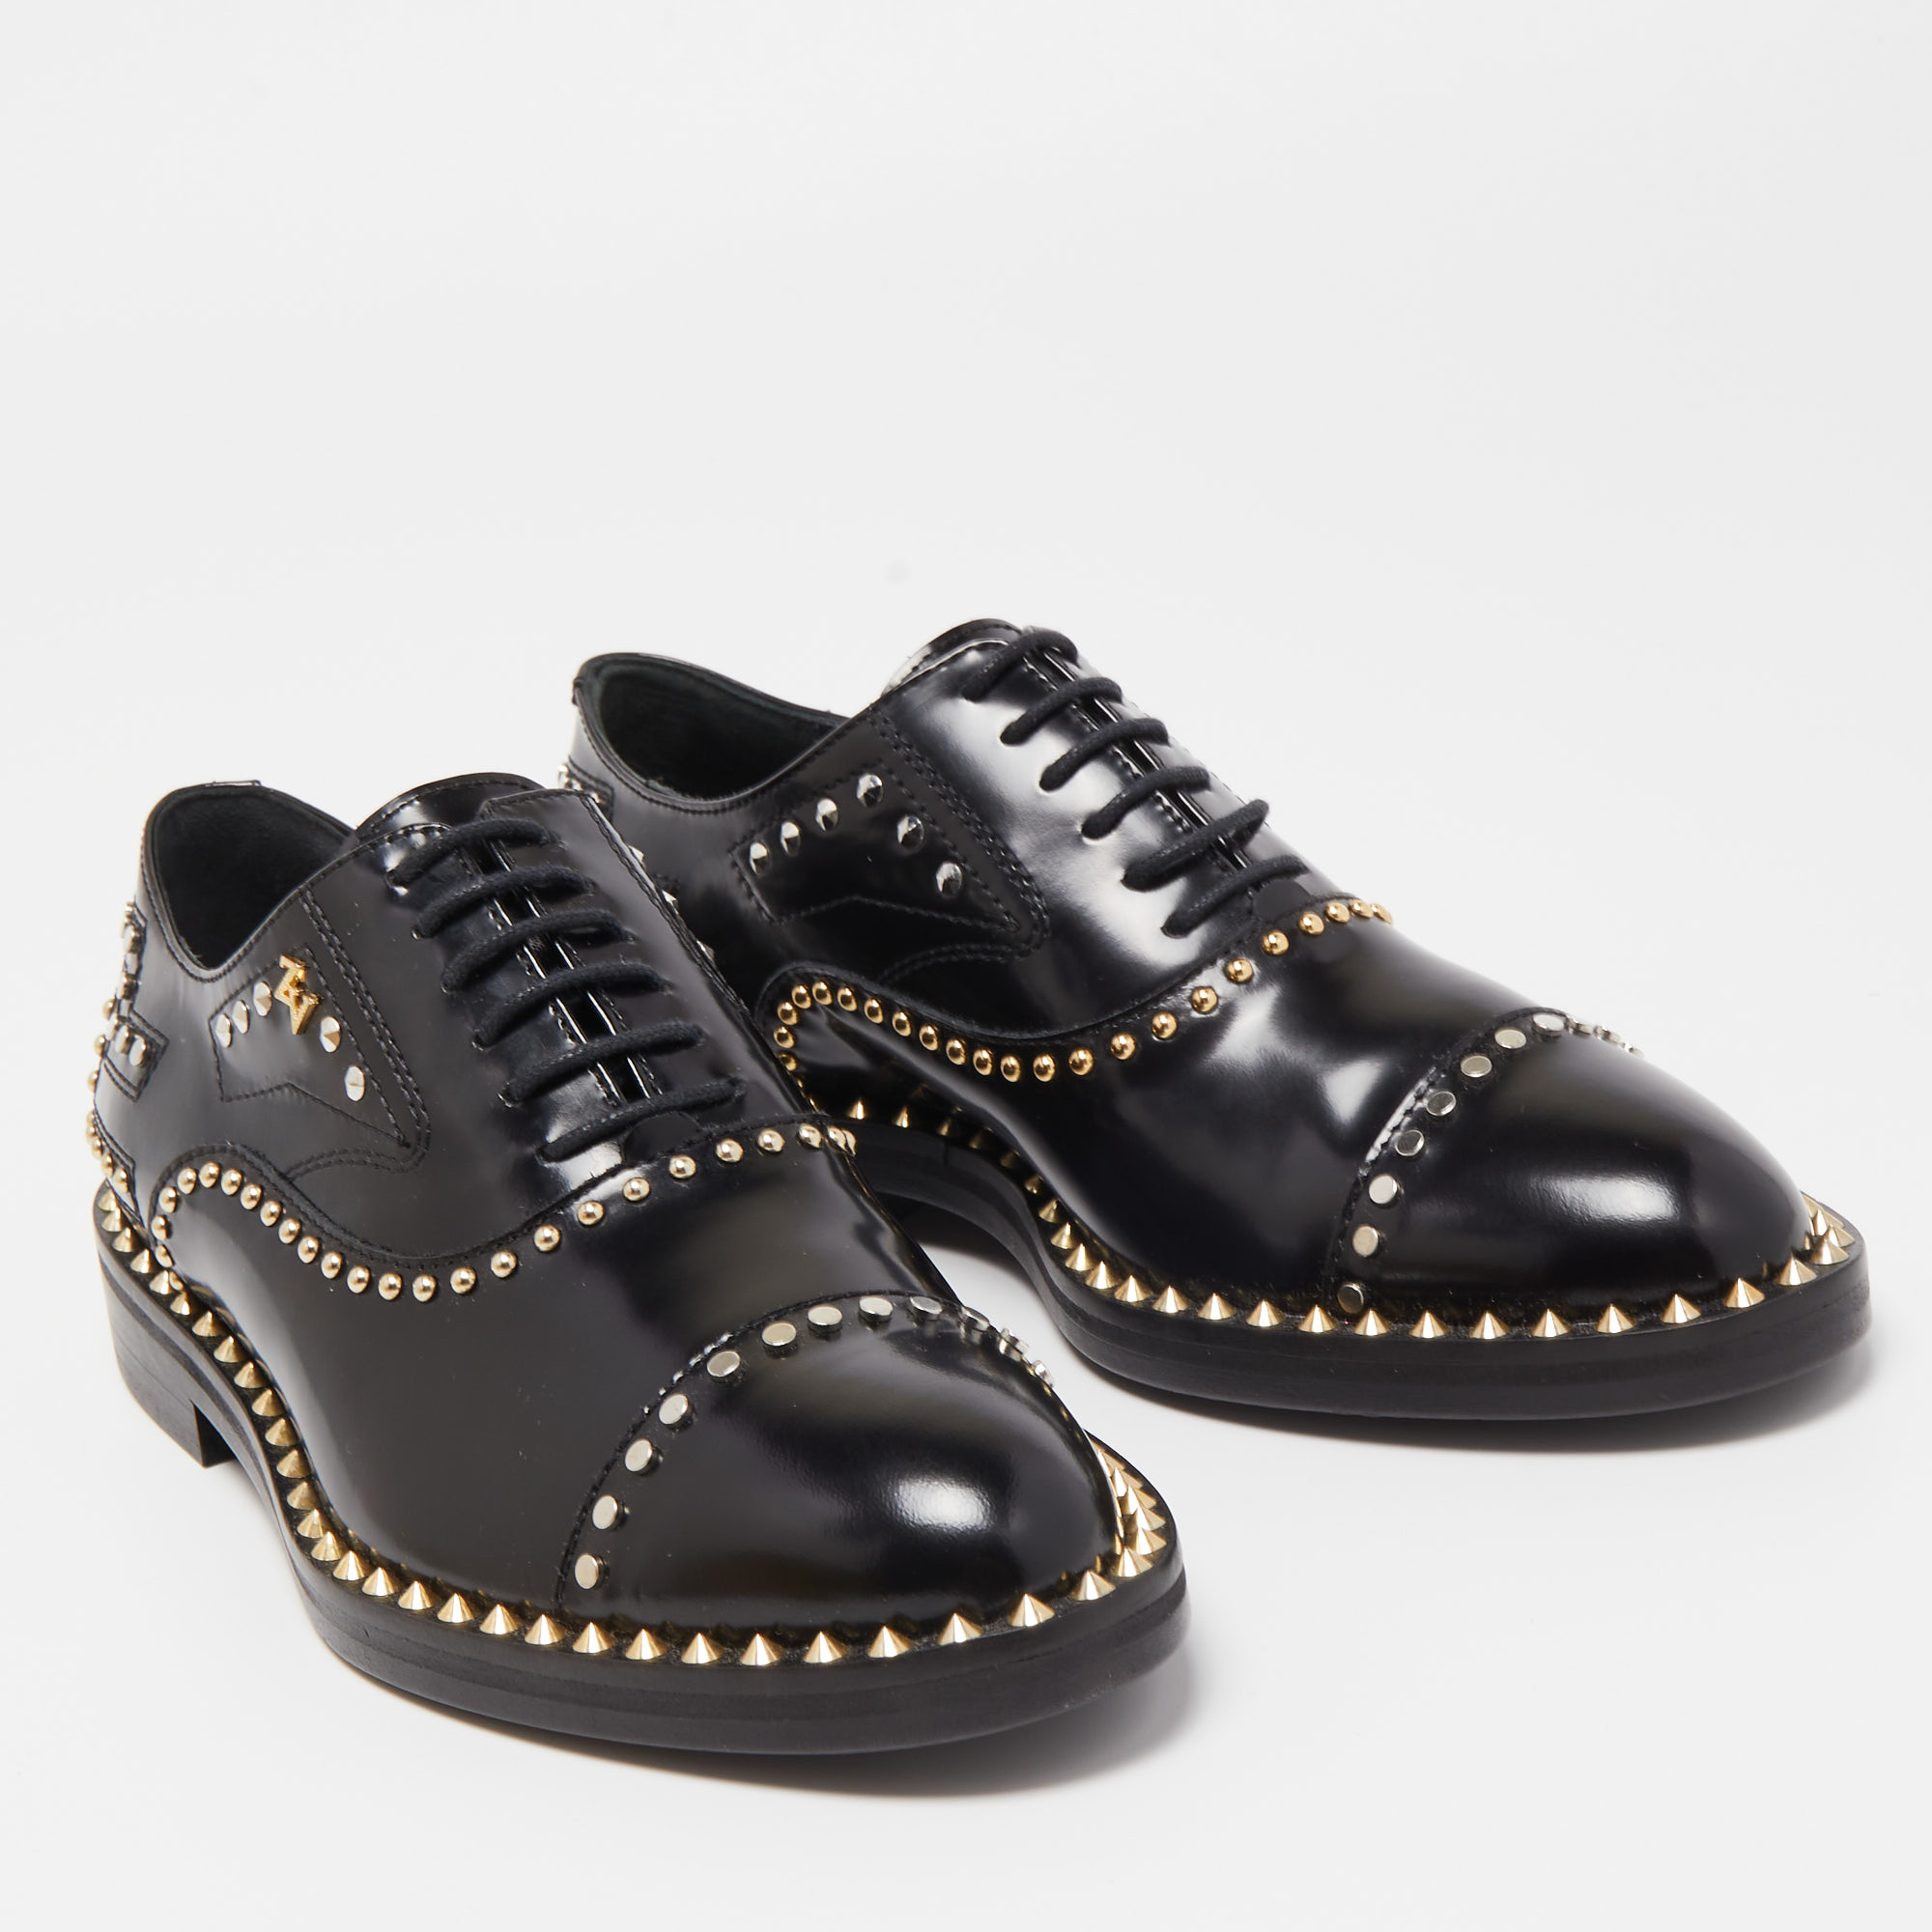 Zadig & Voltaire Black Leather Studded Lace Up Oxfords Size 37